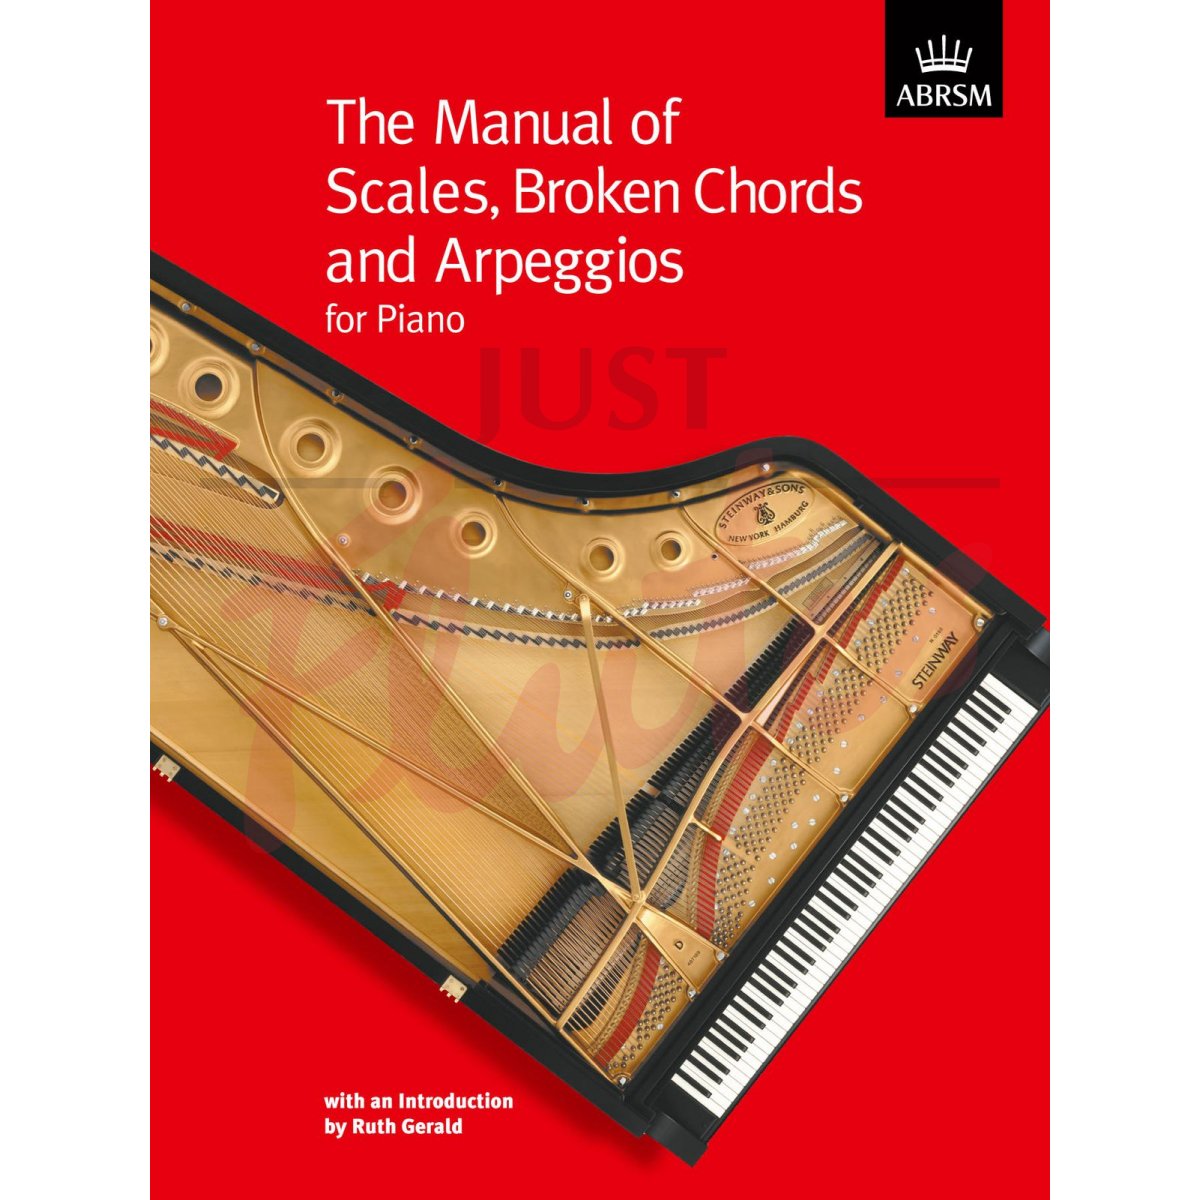 The Manual of Scales, Arpeggios and Broken Chords for Piano